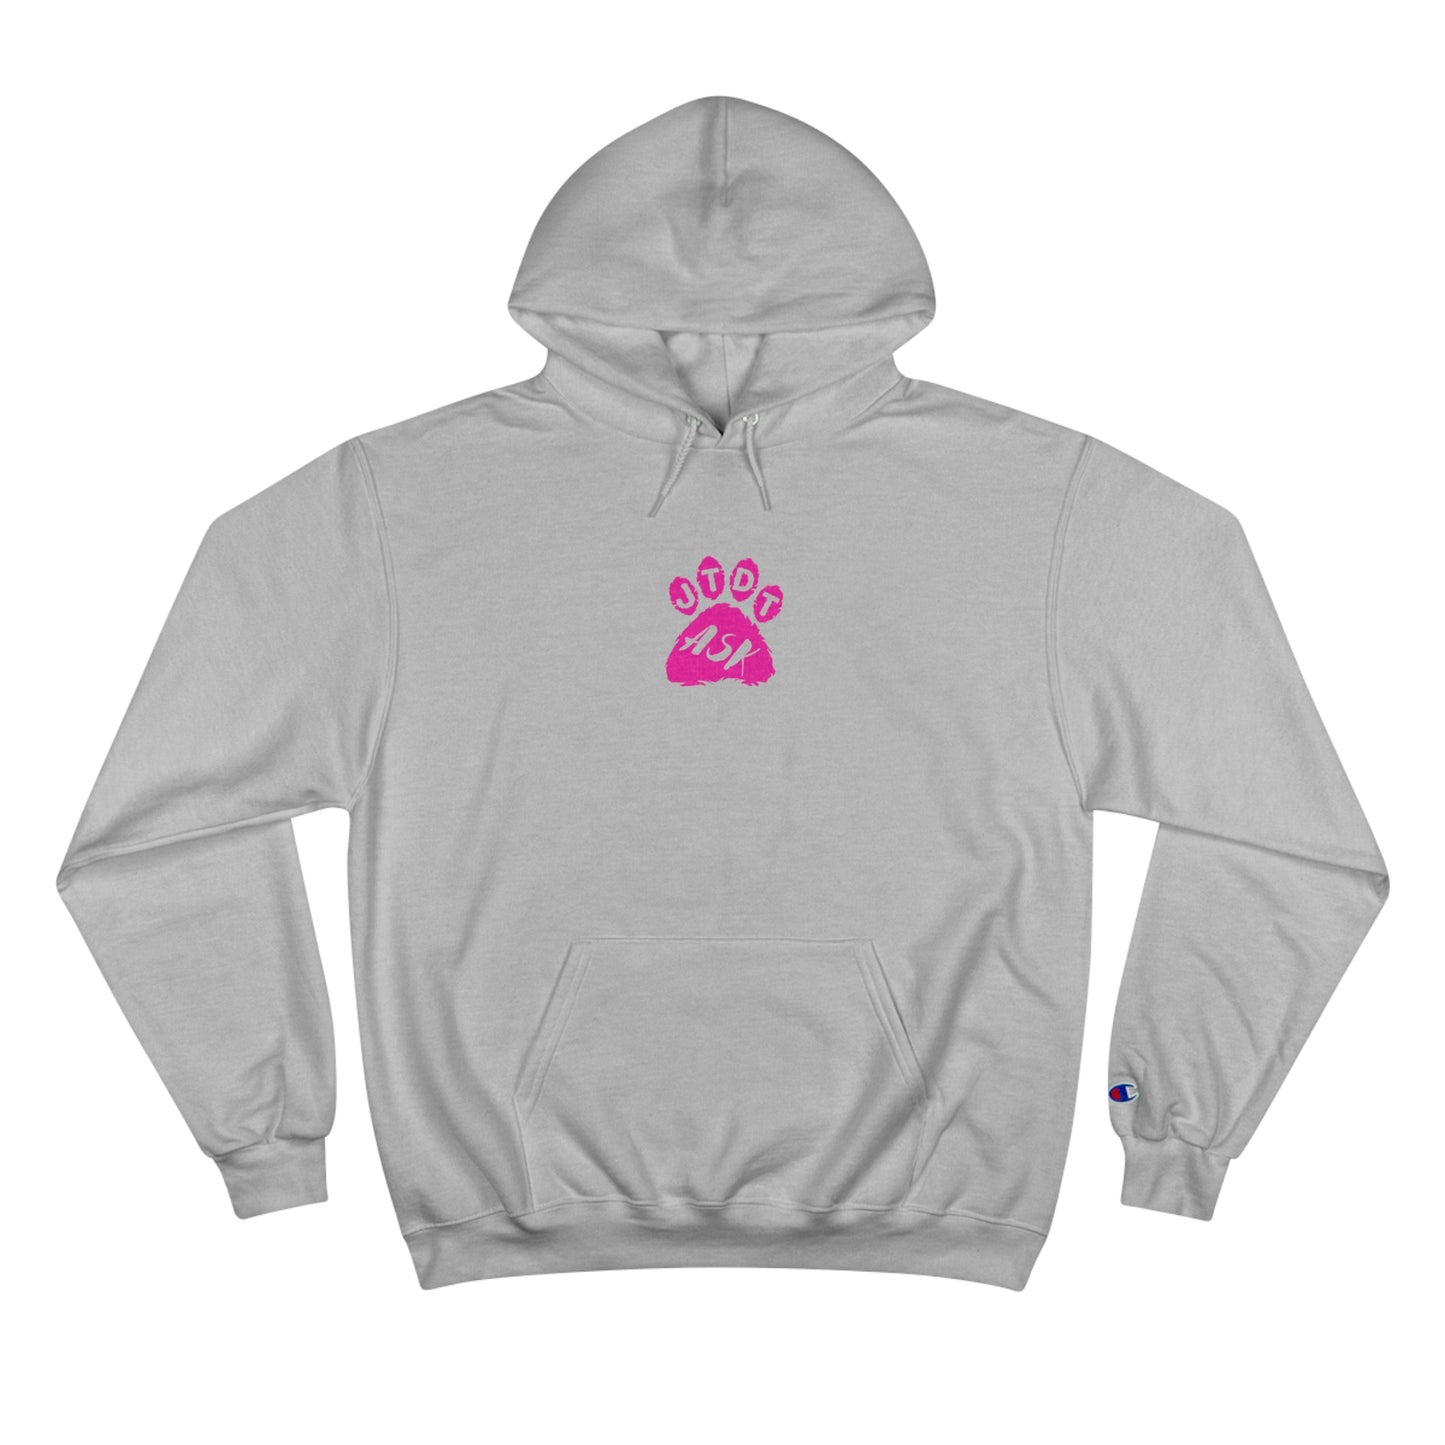 :

Moonstyx Streetwear - "Dog Friendly People Reactive" (Pink Ask JTDT) Pitbull Edition - Unisex Tee